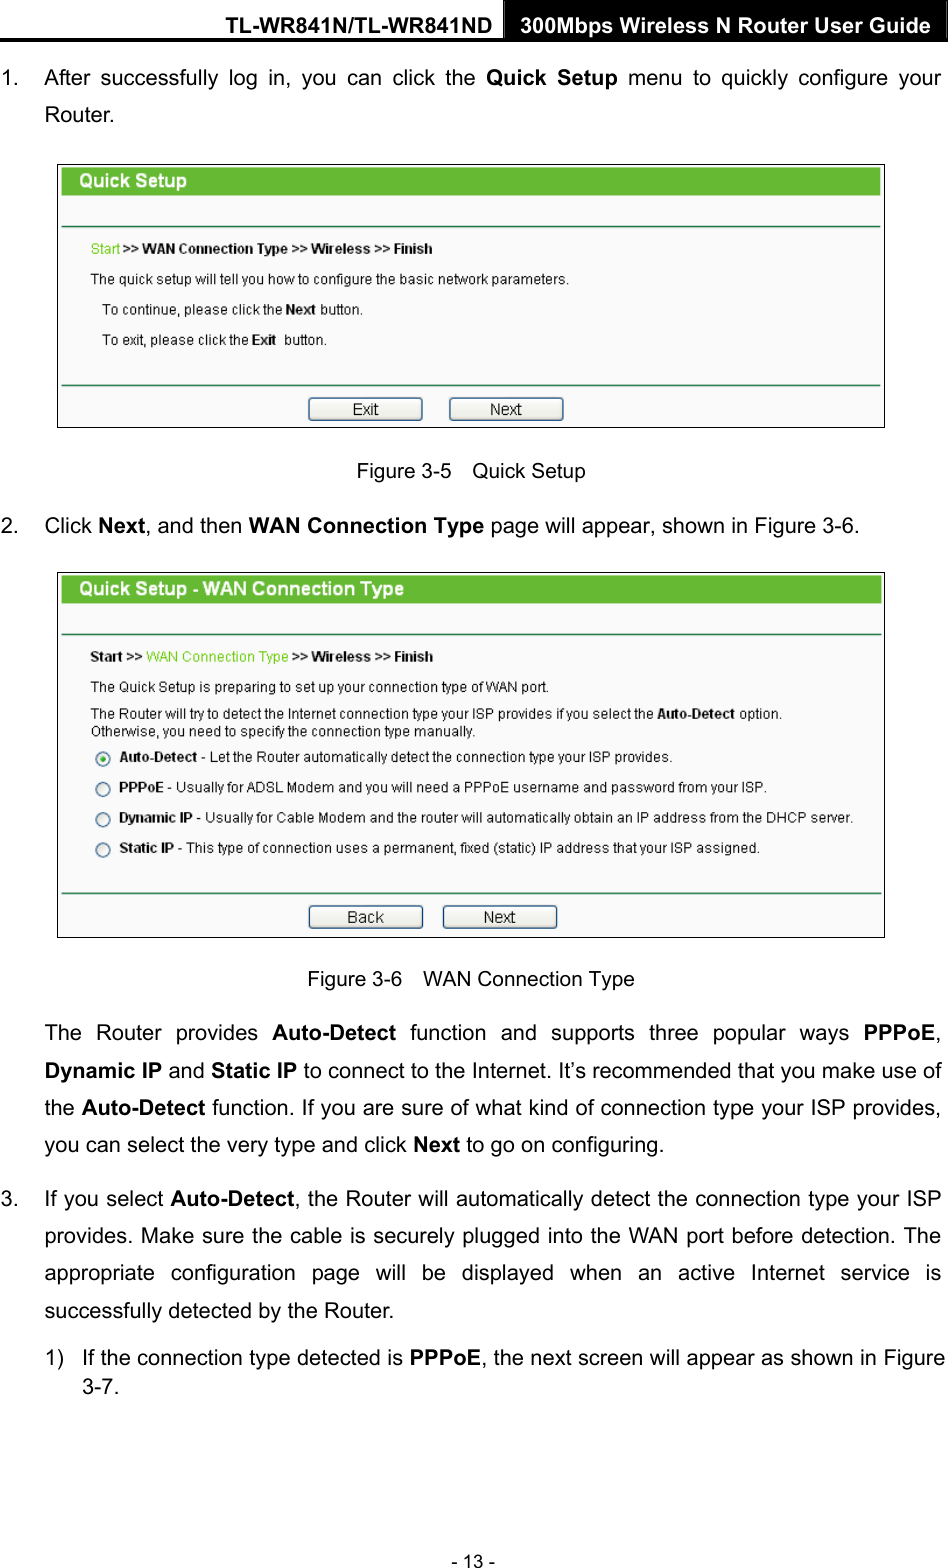 TL-WR841N/TL-WR841ND 300Mbps Wireless N Router User Guide - 13 - 1.  After successfully log in, you can click the Quick Setup menu to quickly configure your Router.   Figure 3-5    Quick Setup 2. Click Next, and then WAN Connection Type page will appear, shown in Figure 3-6.  Figure 3-6    WAN Connection Type The Router provides Auto-Detect function and supports three popular ways PPPoE, Dynamic IP and Static IP to connect to the Internet. It’s recommended that you make use of the Auto-Detect function. If you are sure of what kind of connection type your ISP provides, you can select the very type and click Next to go on configuring. 3.  If you select Auto-Detect, the Router will automatically detect the connection type your ISP provides. Make sure the cable is securely plugged into the WAN port before detection. The appropriate configuration page will be displayed when an active Internet service is successfully detected by the Router. 1) If the connection type detected is PPPoE, the next screen will appear as shown in Figure 3-7. 